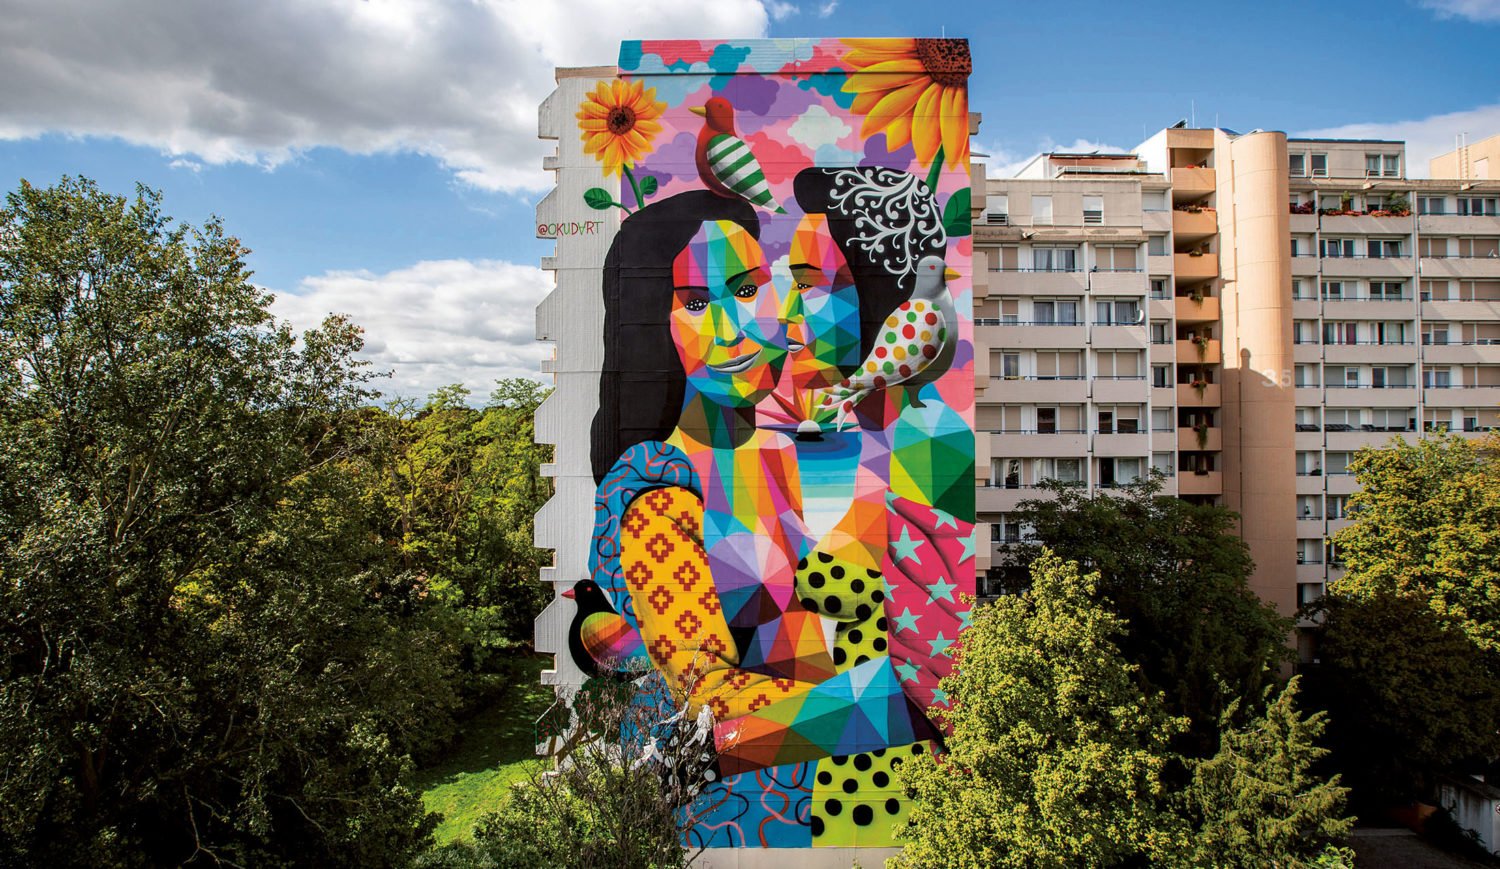 Thanks to "Stadt.Wand.Kunst" Mannheim's gray walls are gradually being transformed into colorful works of art